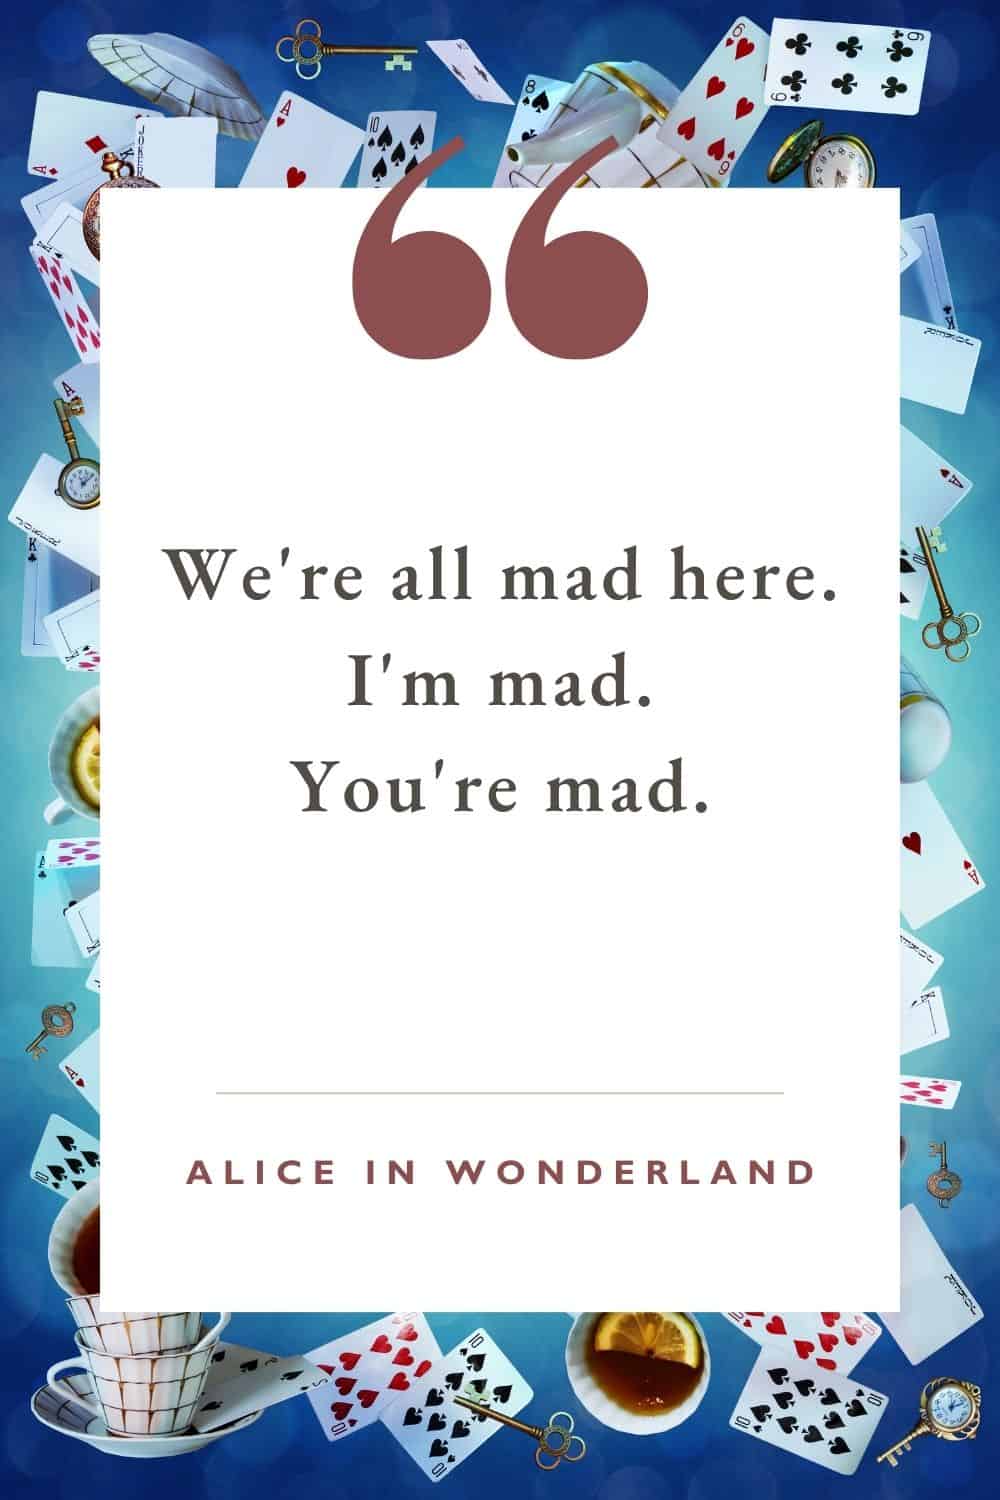 we're all mad here. i'm made. you're mad.